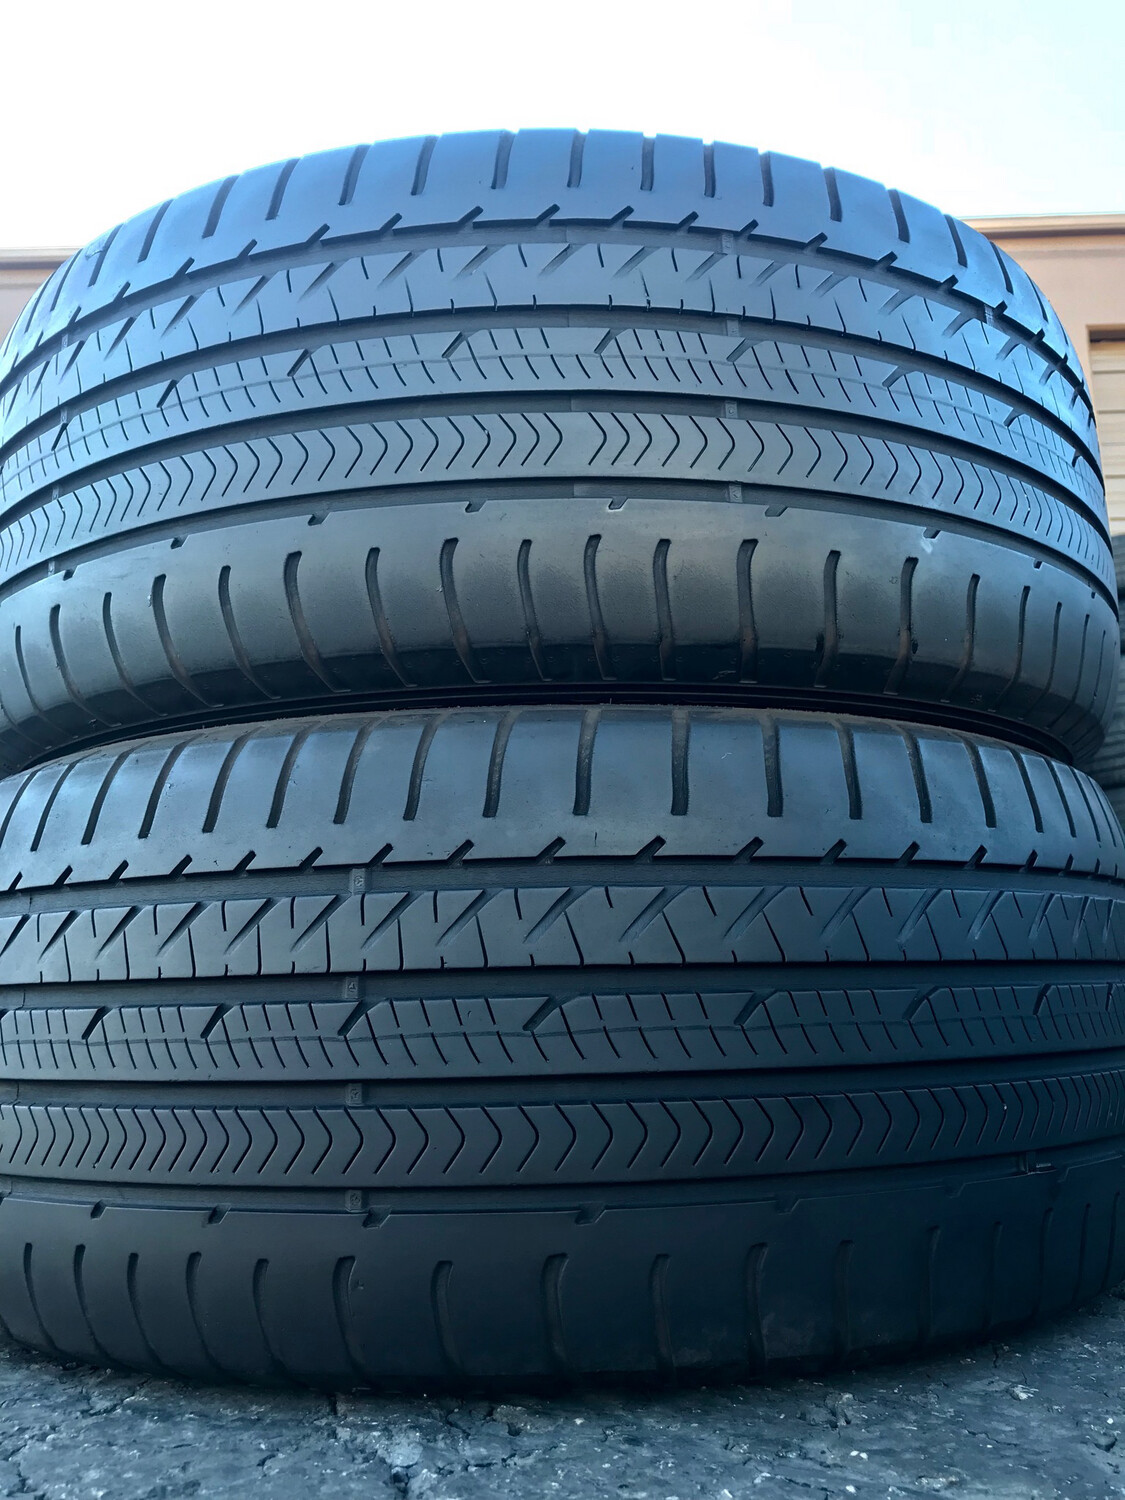 2 USED TIRES 285/45R20 Goodyear EAGLE SPORT A/S RFT WITH 50% TREAD LIFE